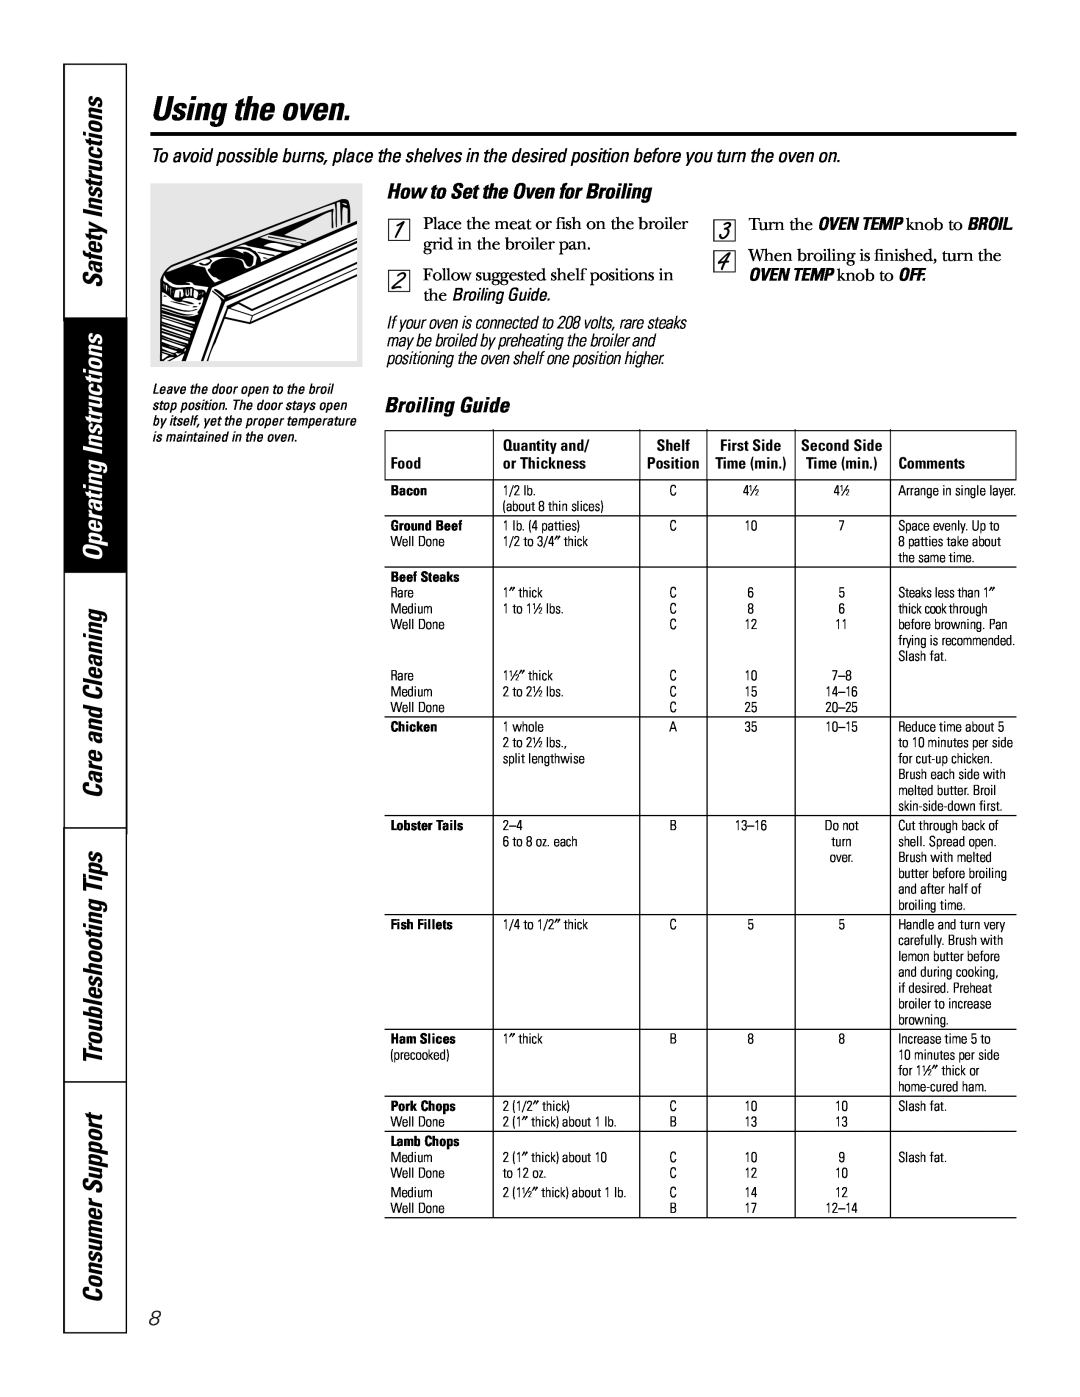 GE JMS08 Consumer Support Troubleshooting Tips Care and Cleaning Operating, How to Set the Oven for Broiling, Instructions 